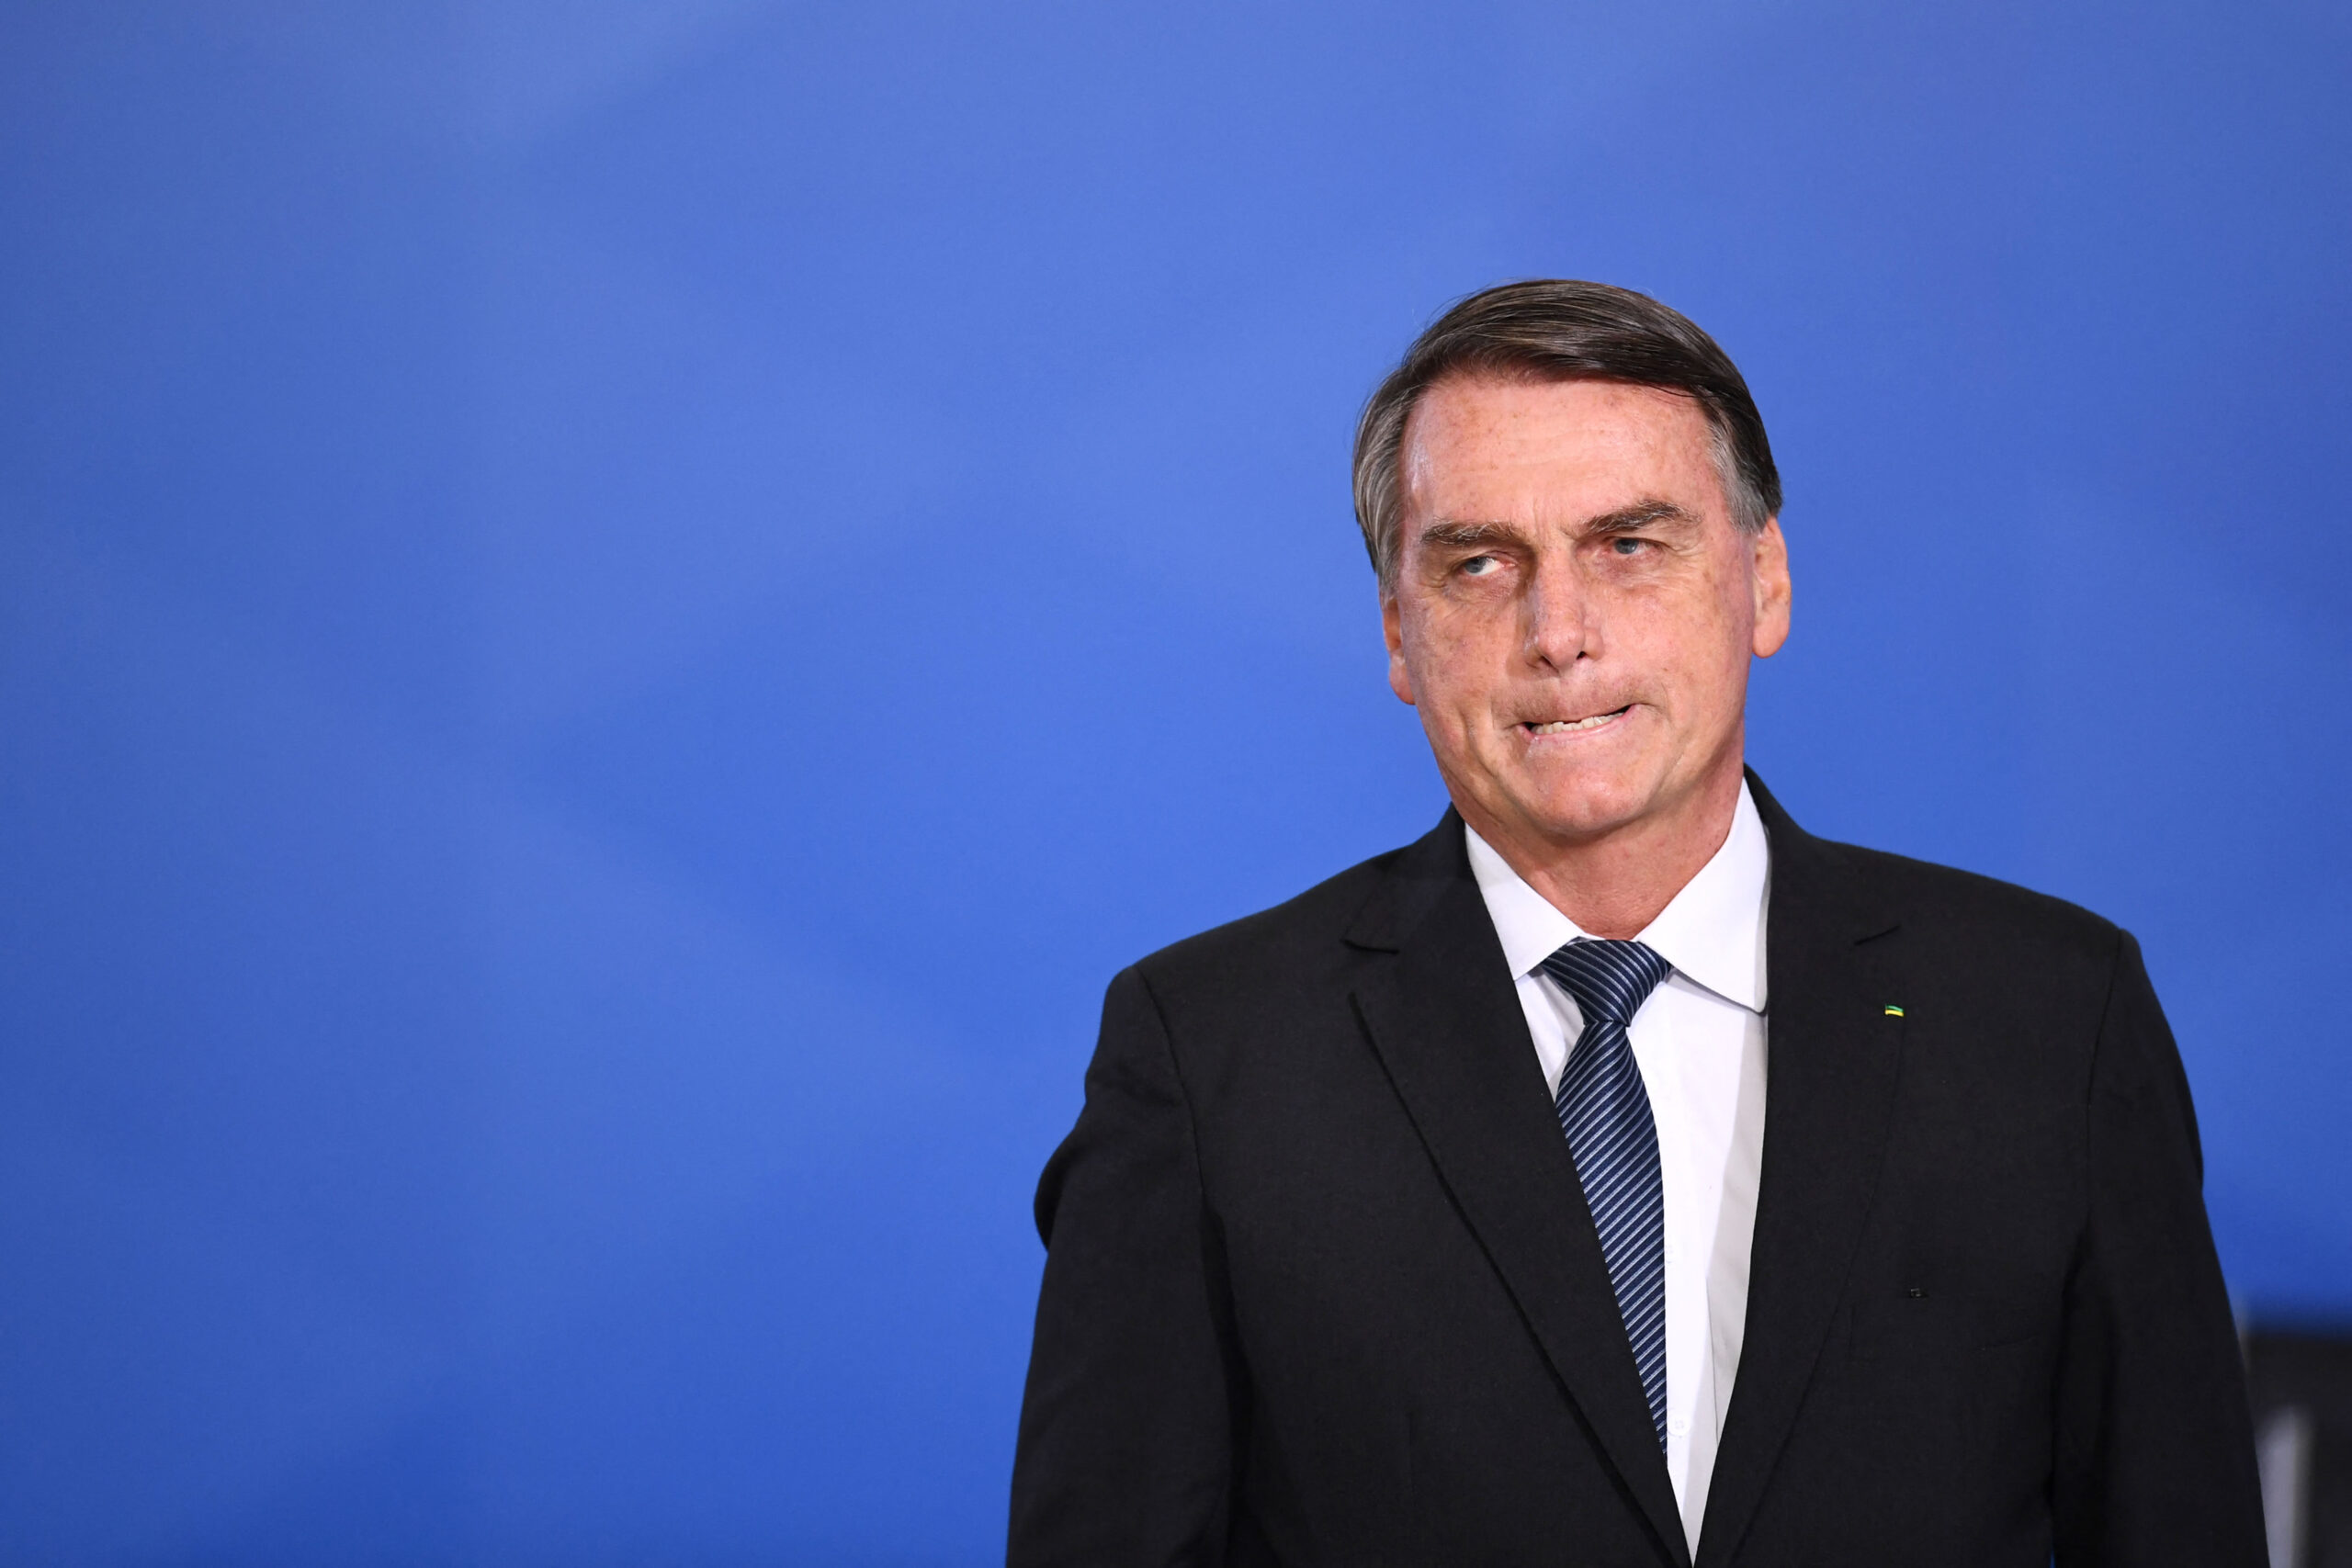 Brazilian President Jair Bolsonaro gestures during the promotion ceremony of General Officers of the Armed Forces, at Planalto Palace in Brasilia, on August 4, 2022. (Photo by EVARISTO SA / AFP)